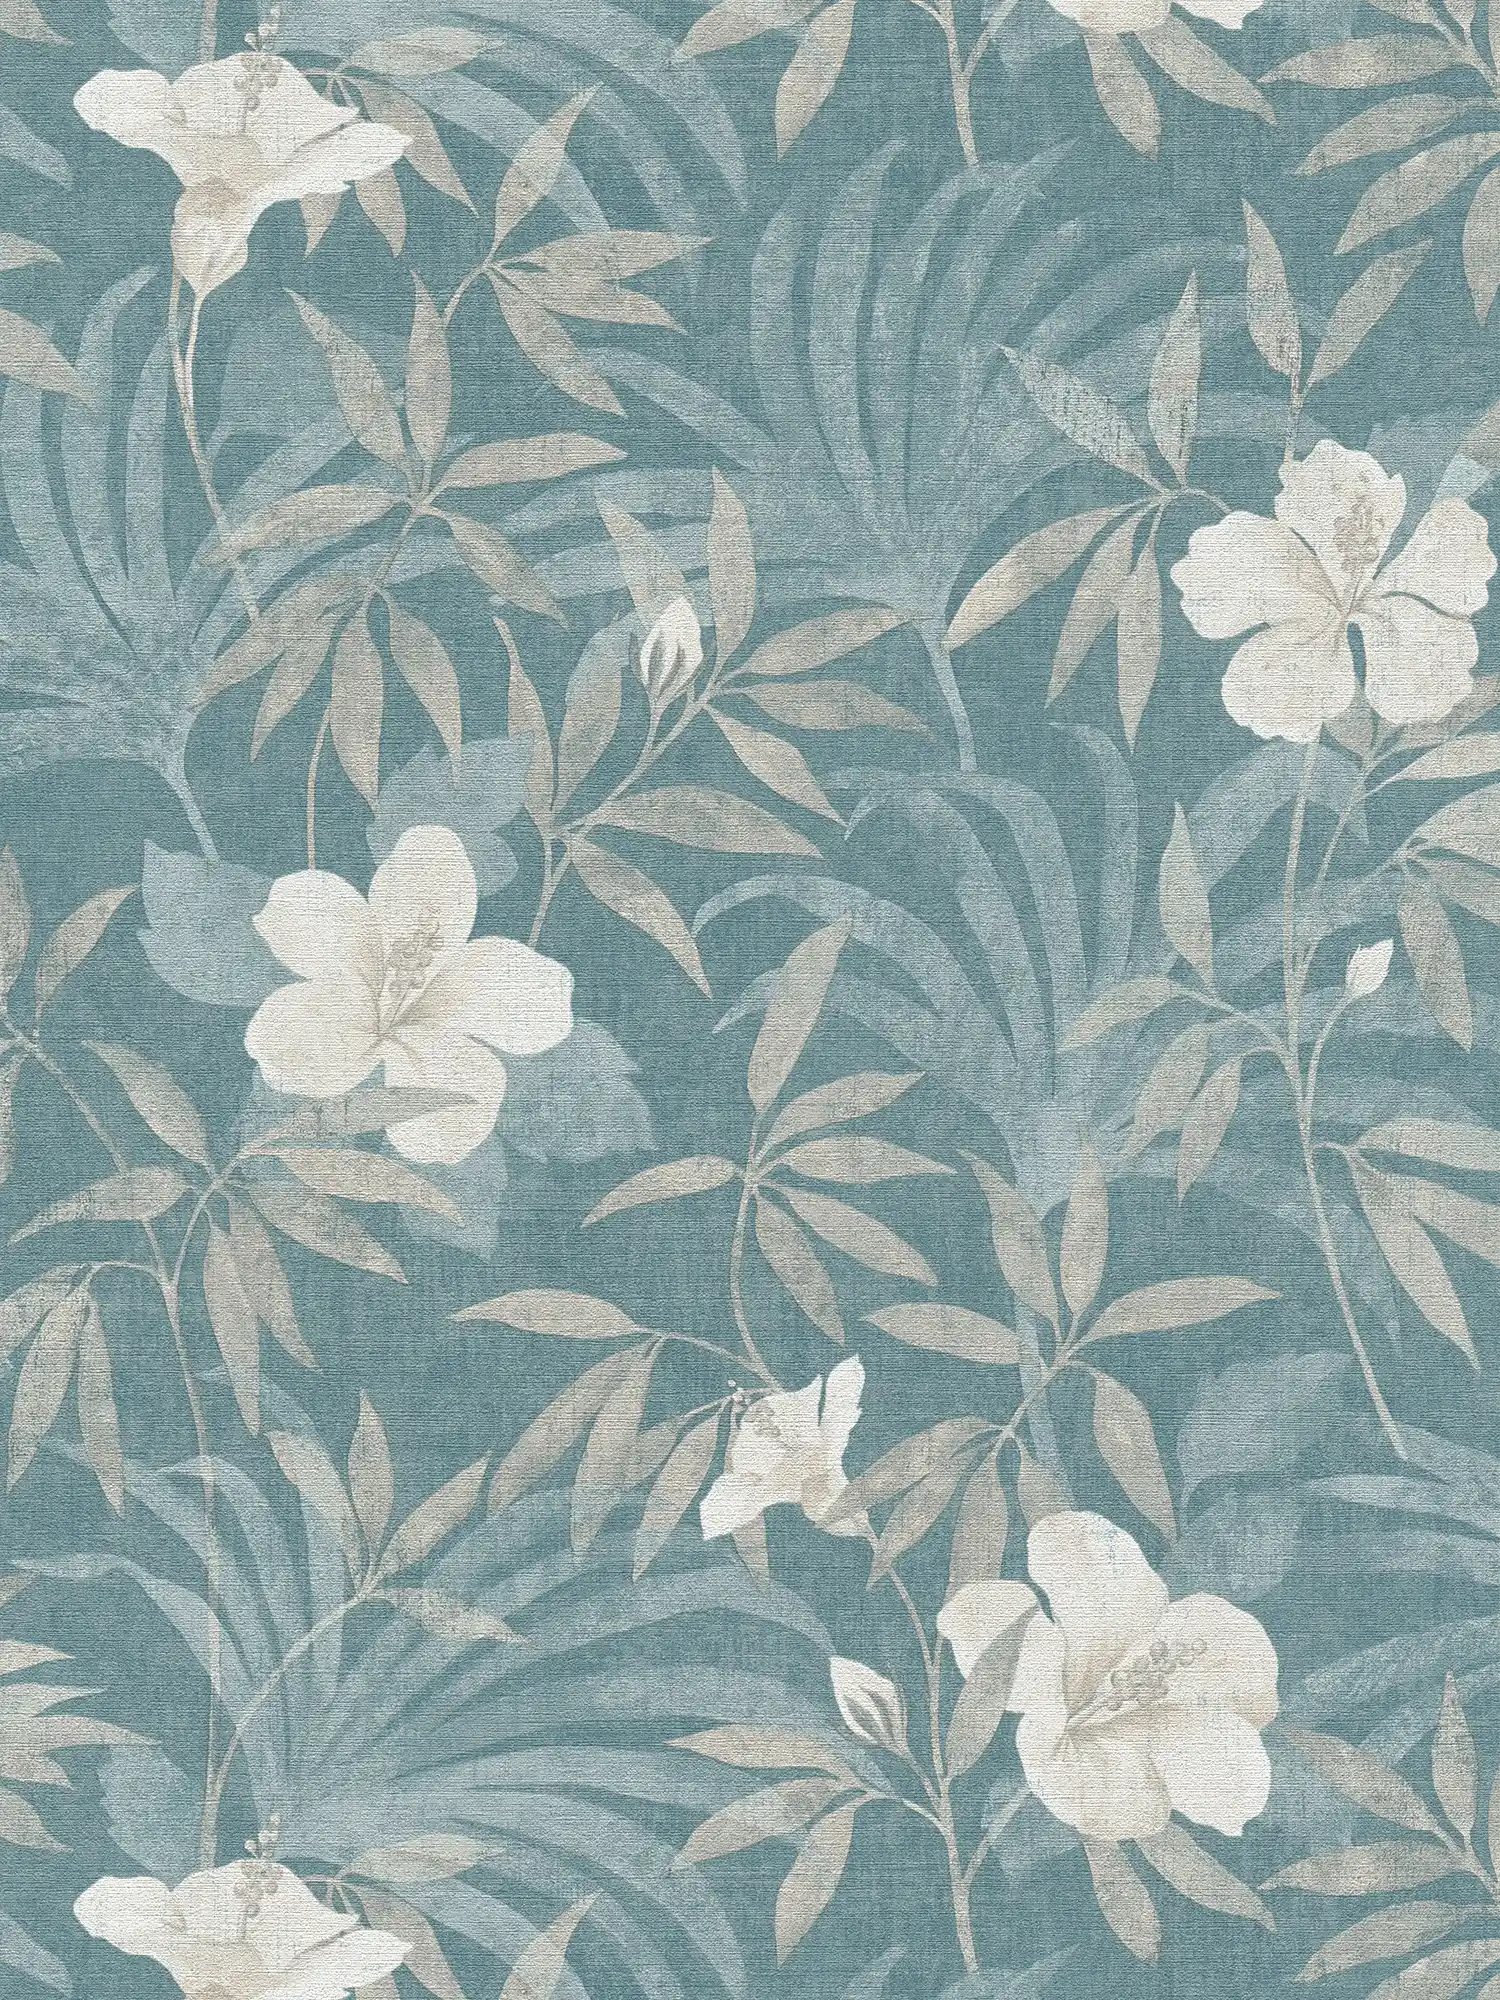         Wallpaper petrol jungle pattern with hibiscus flowers - beige, blue
    